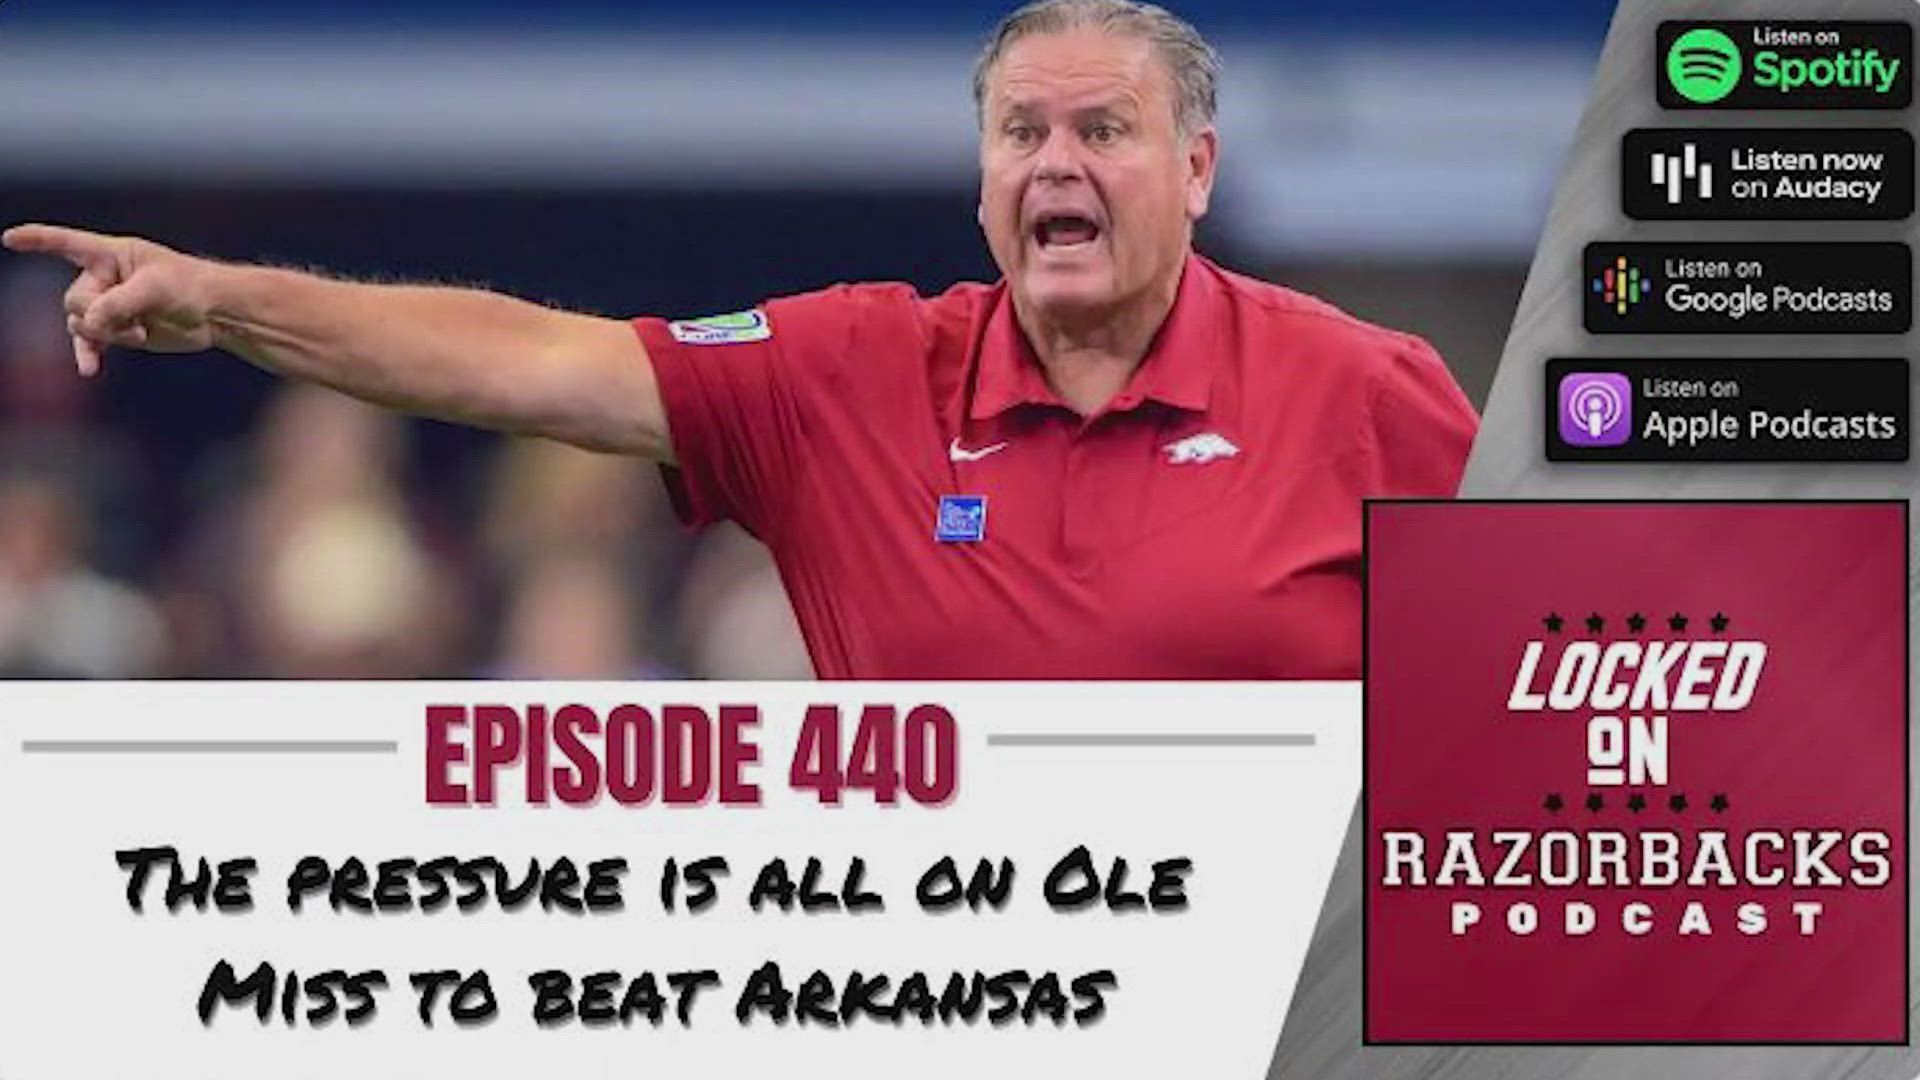 Locked On Razorbacks is breaking down the issues with Razorback Special Teams.